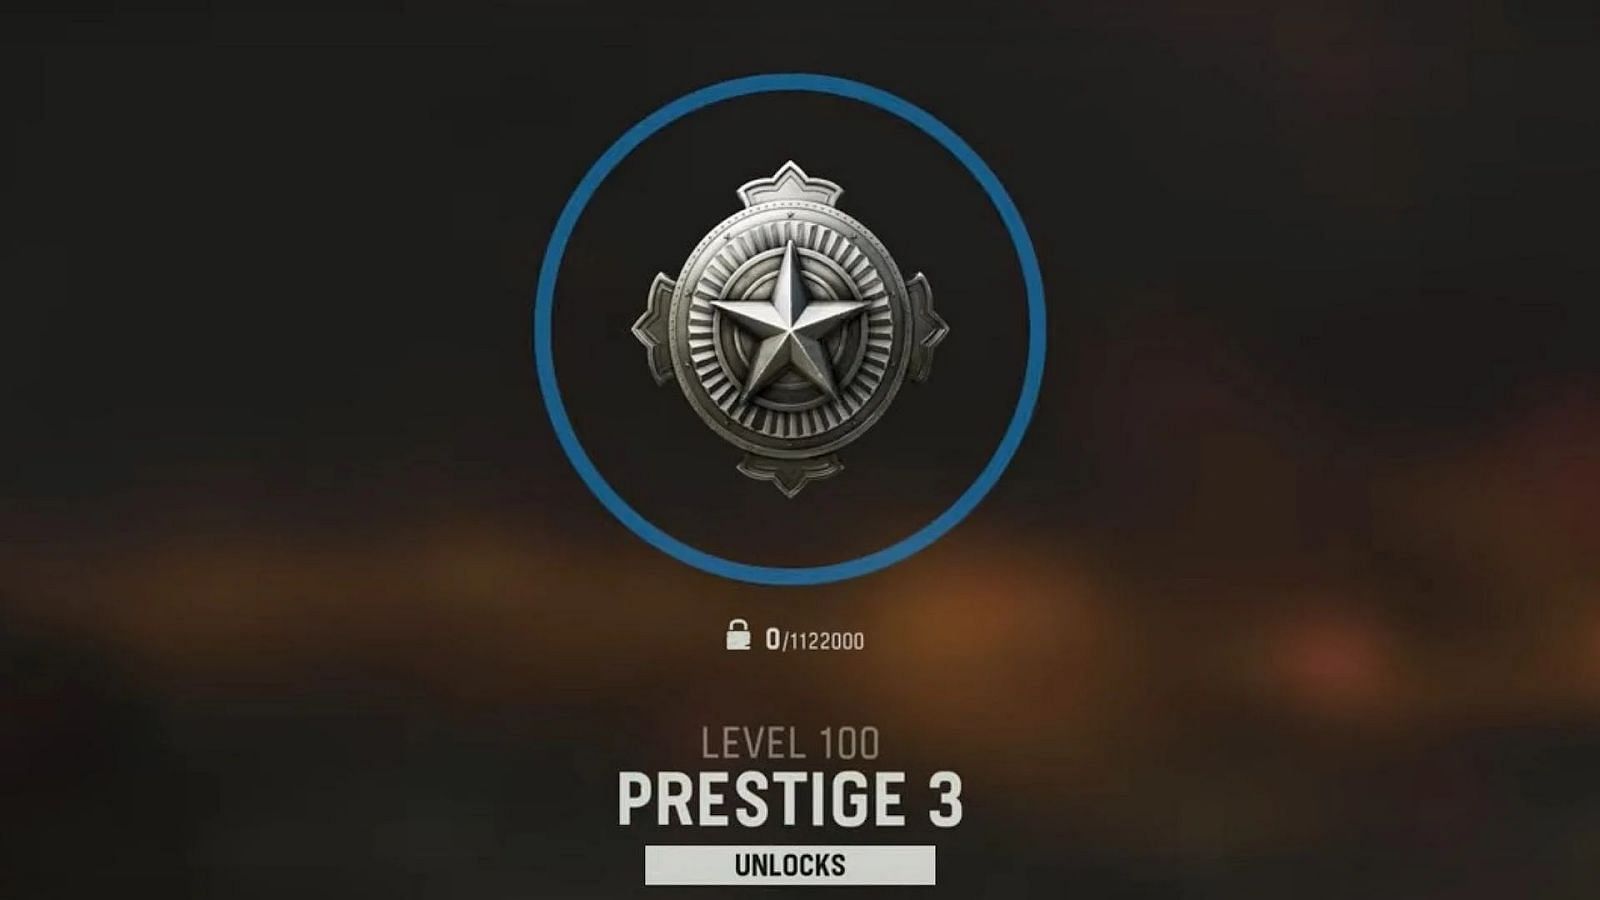 Call of Duty Vanguard Prestige badge (Image by Activision)